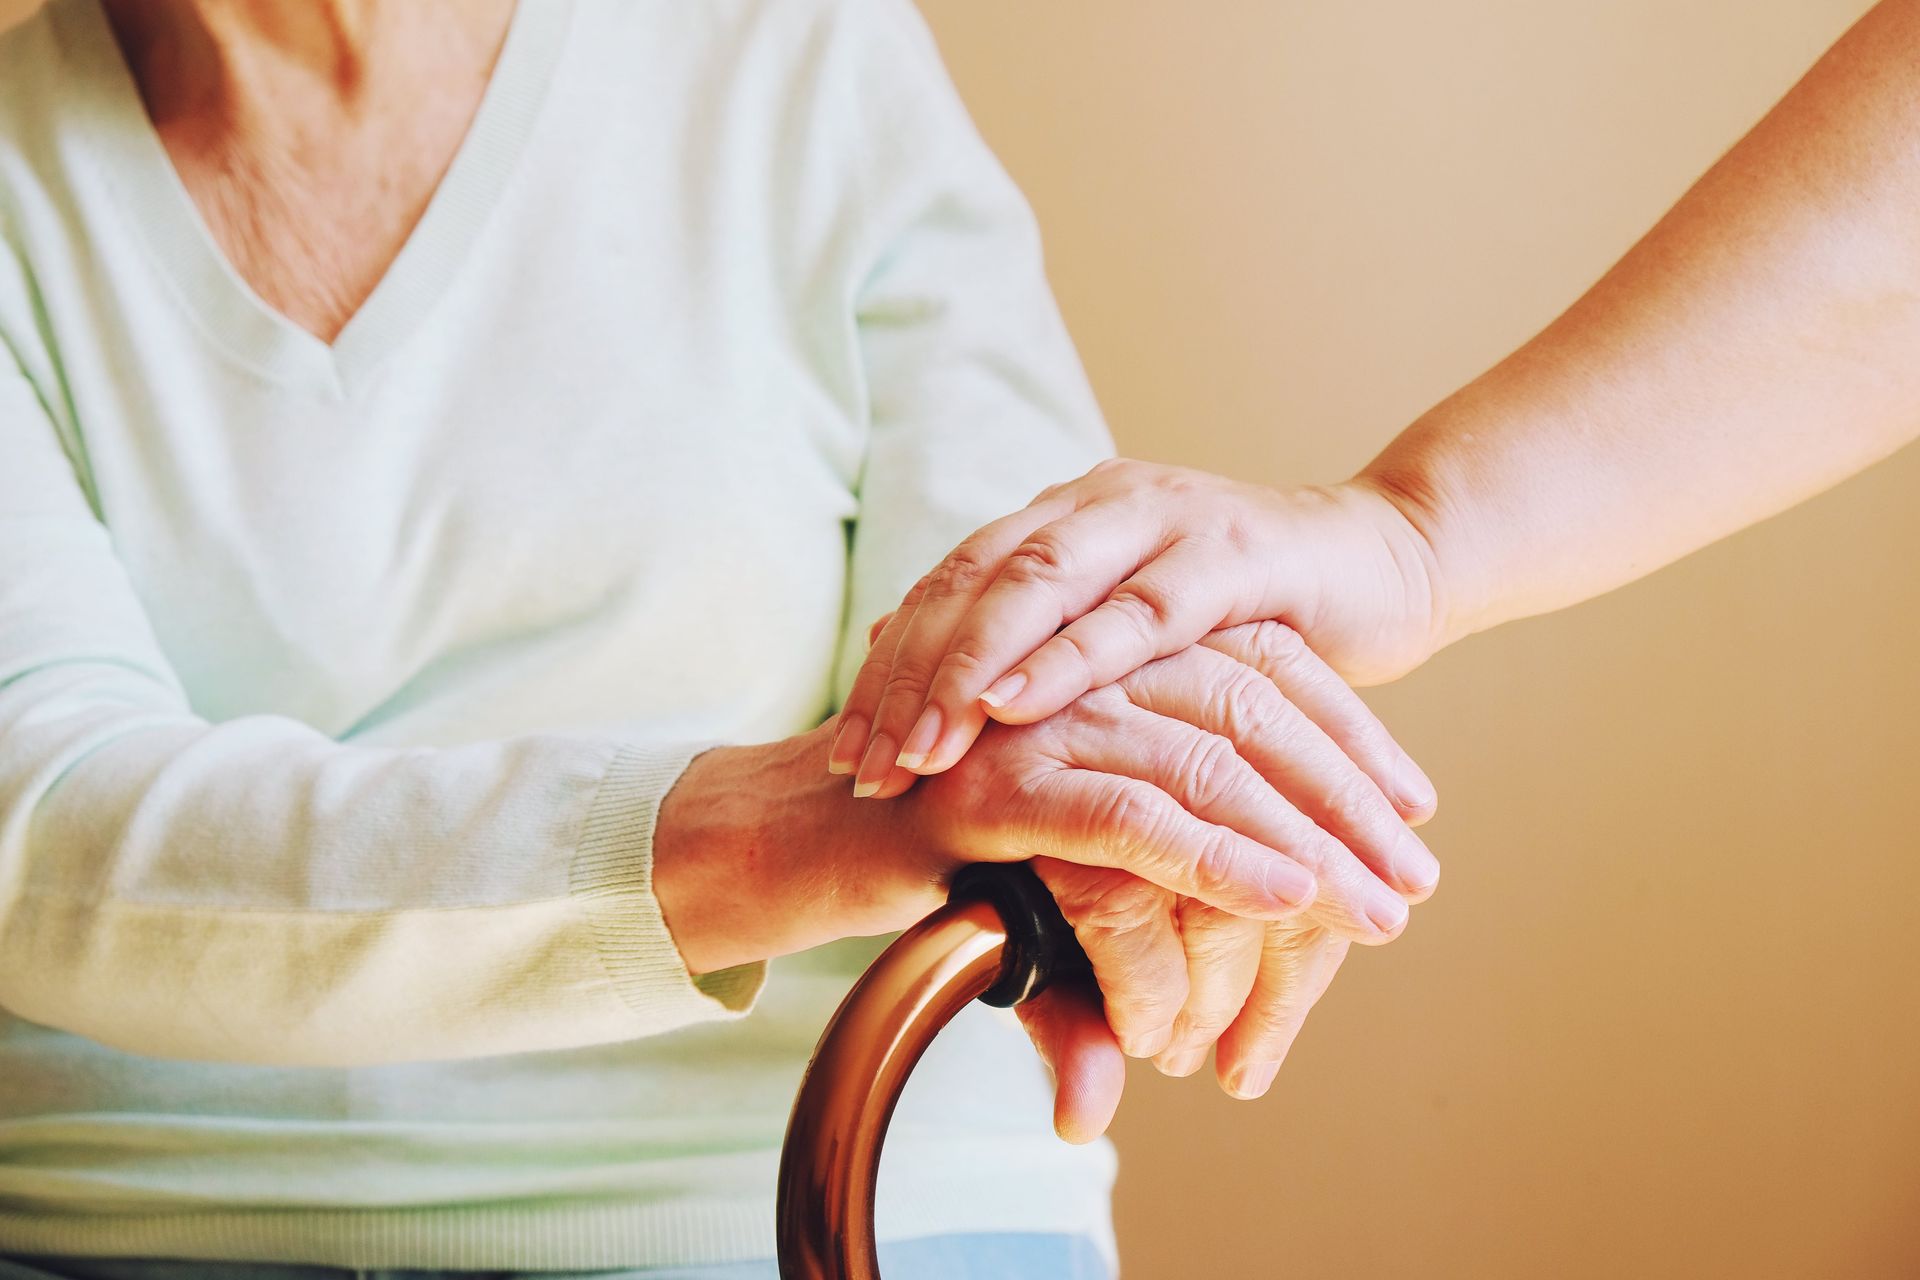 A BPM system for care homes